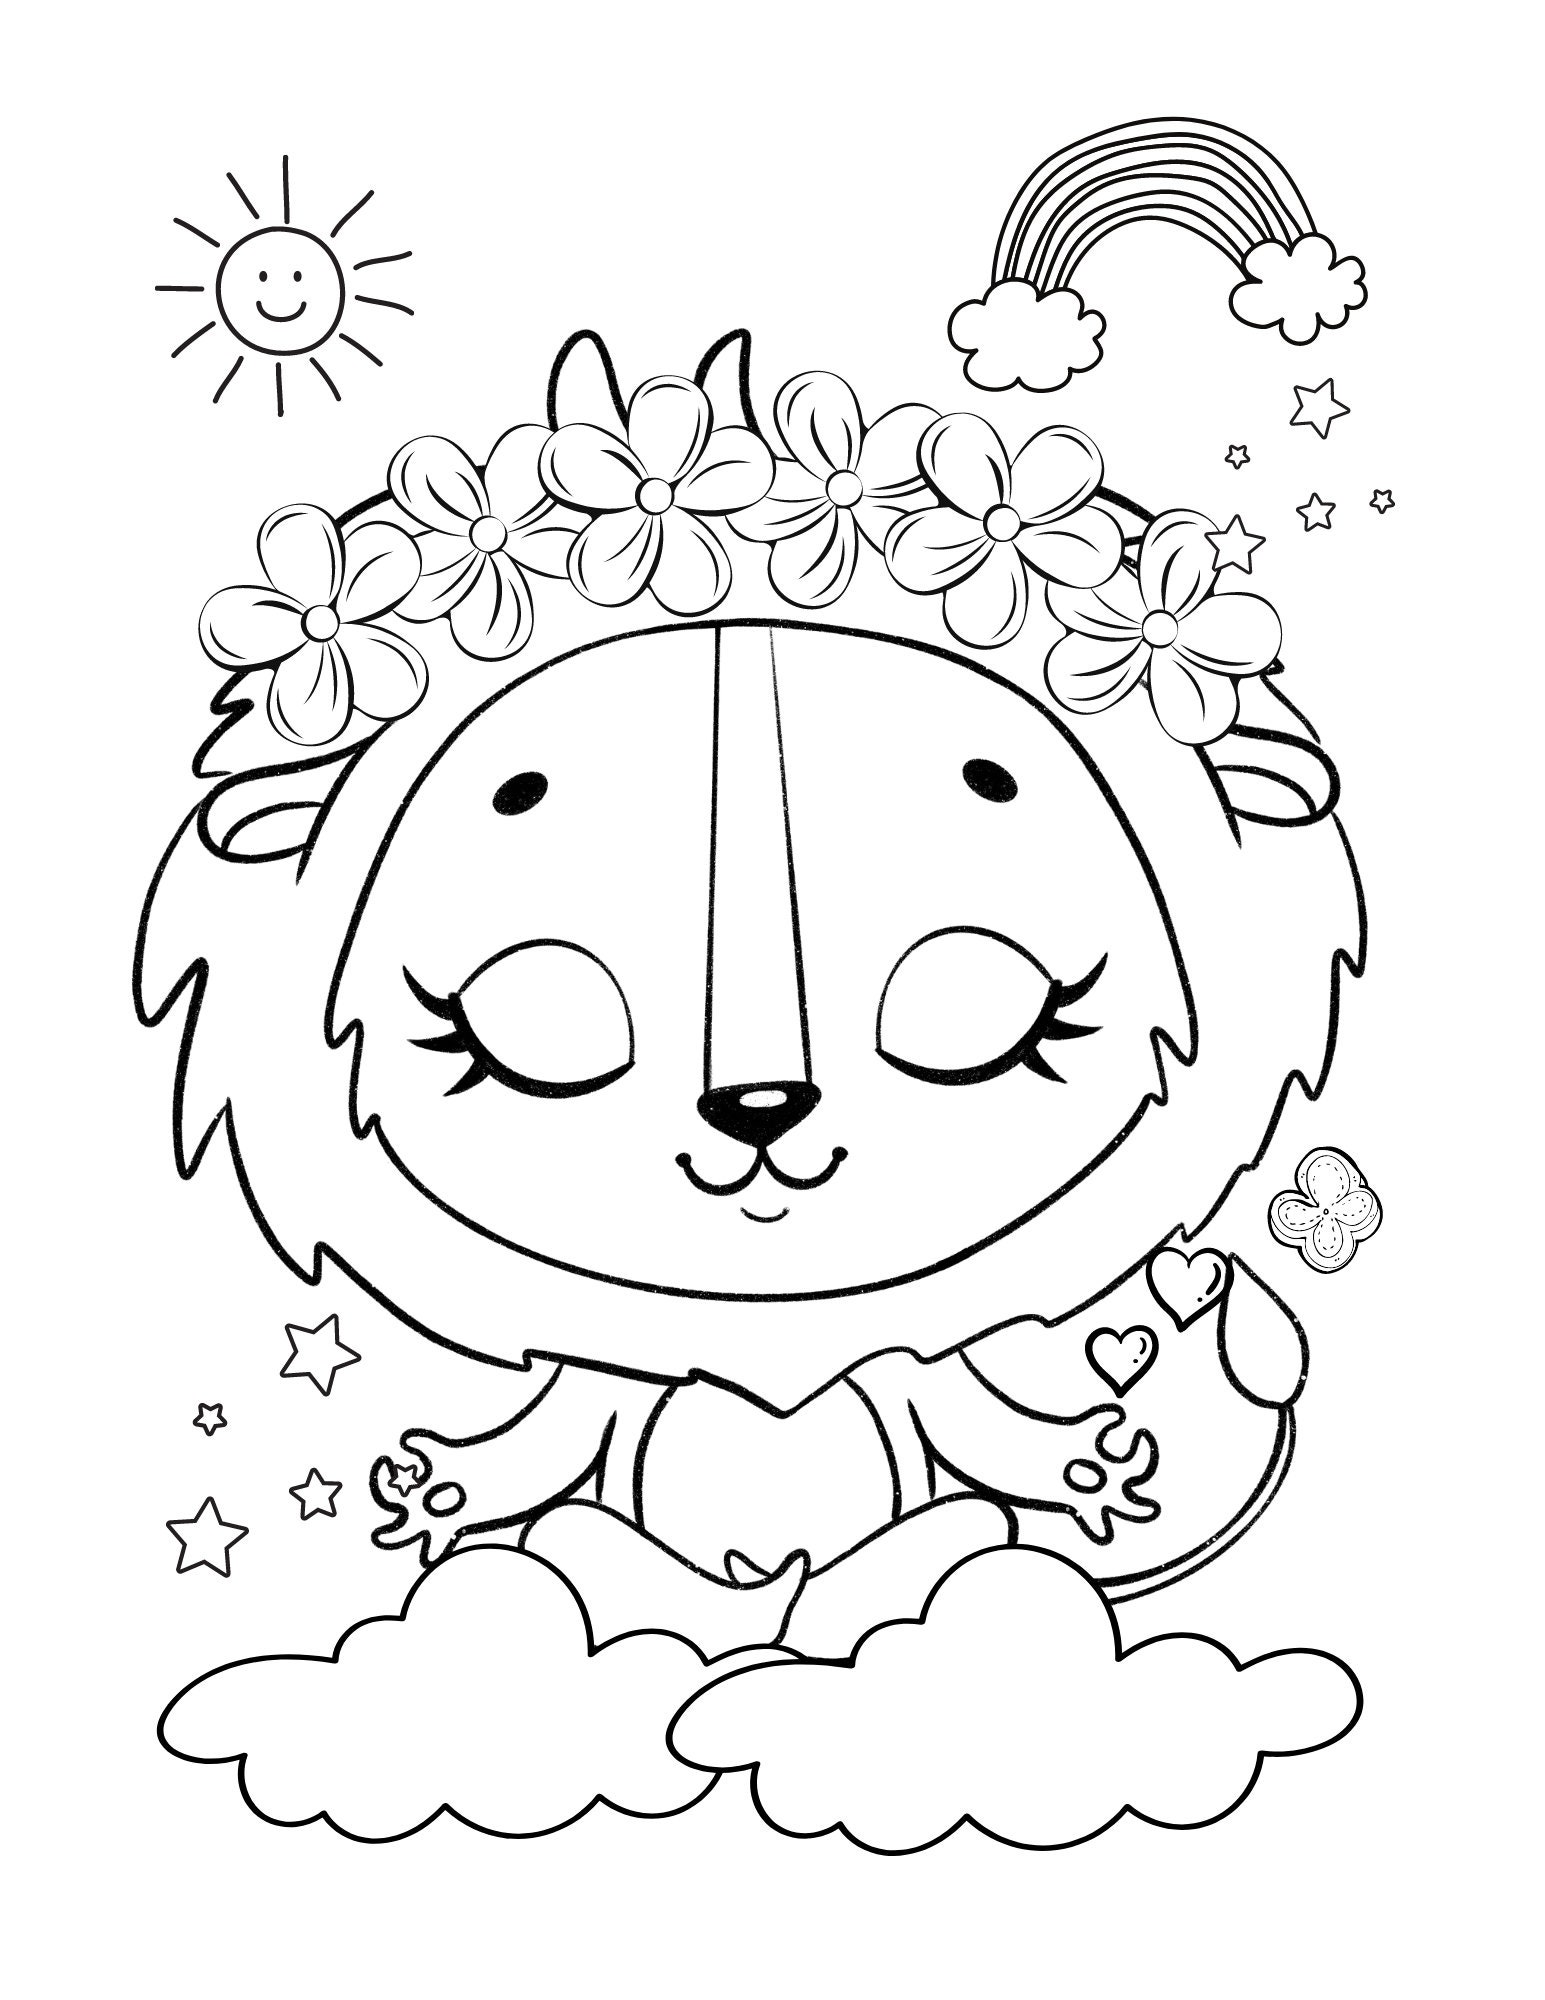 jungle animals coloring page